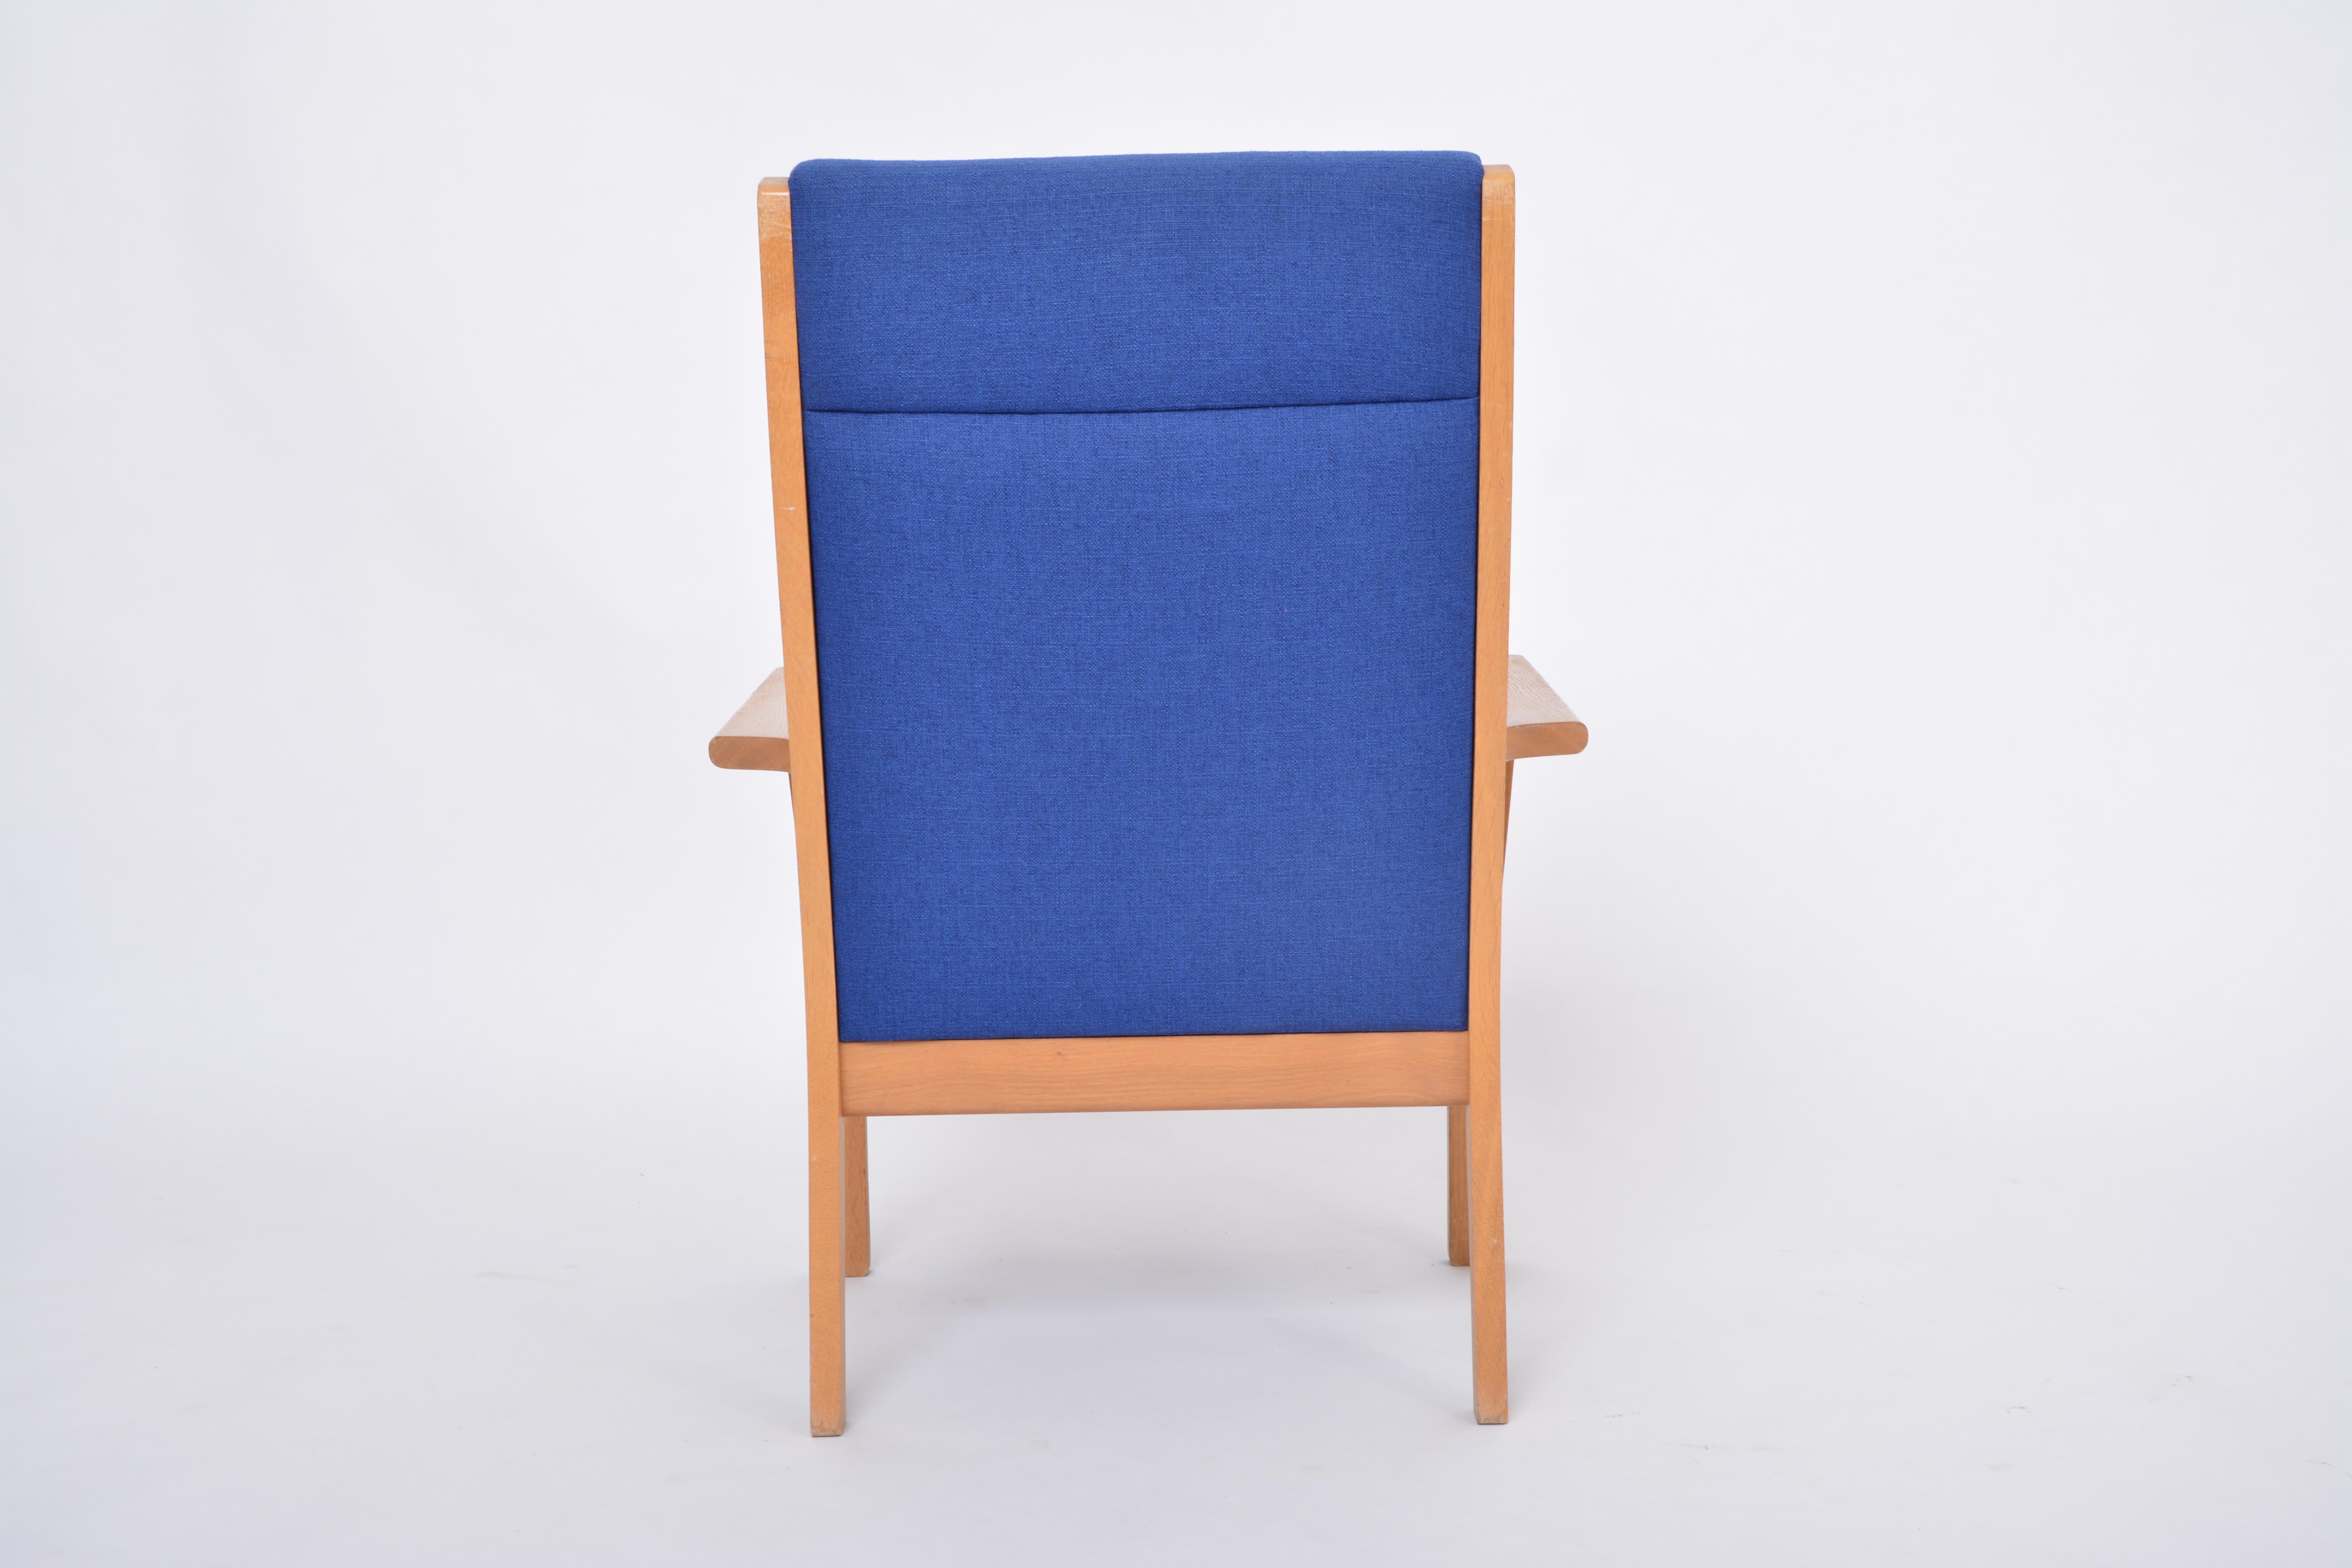 Reupholstered Danish Mid-Century Modern GE 181 a Chair by Hans Wegner for GETAMA For Sale 5